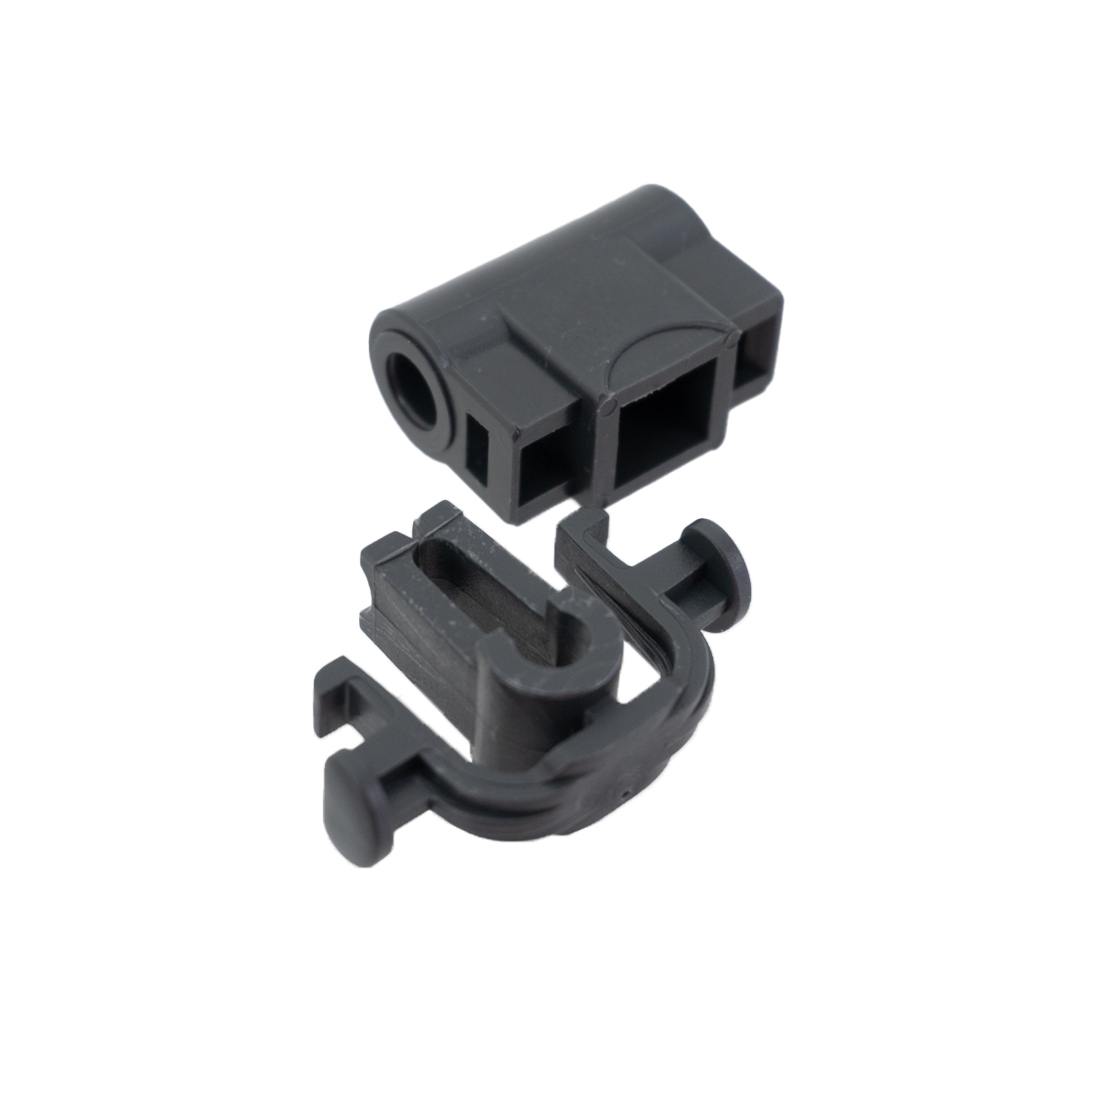 IPC Eagle Quick Release Conversion Kit for Cleano - Detached Side by Side View